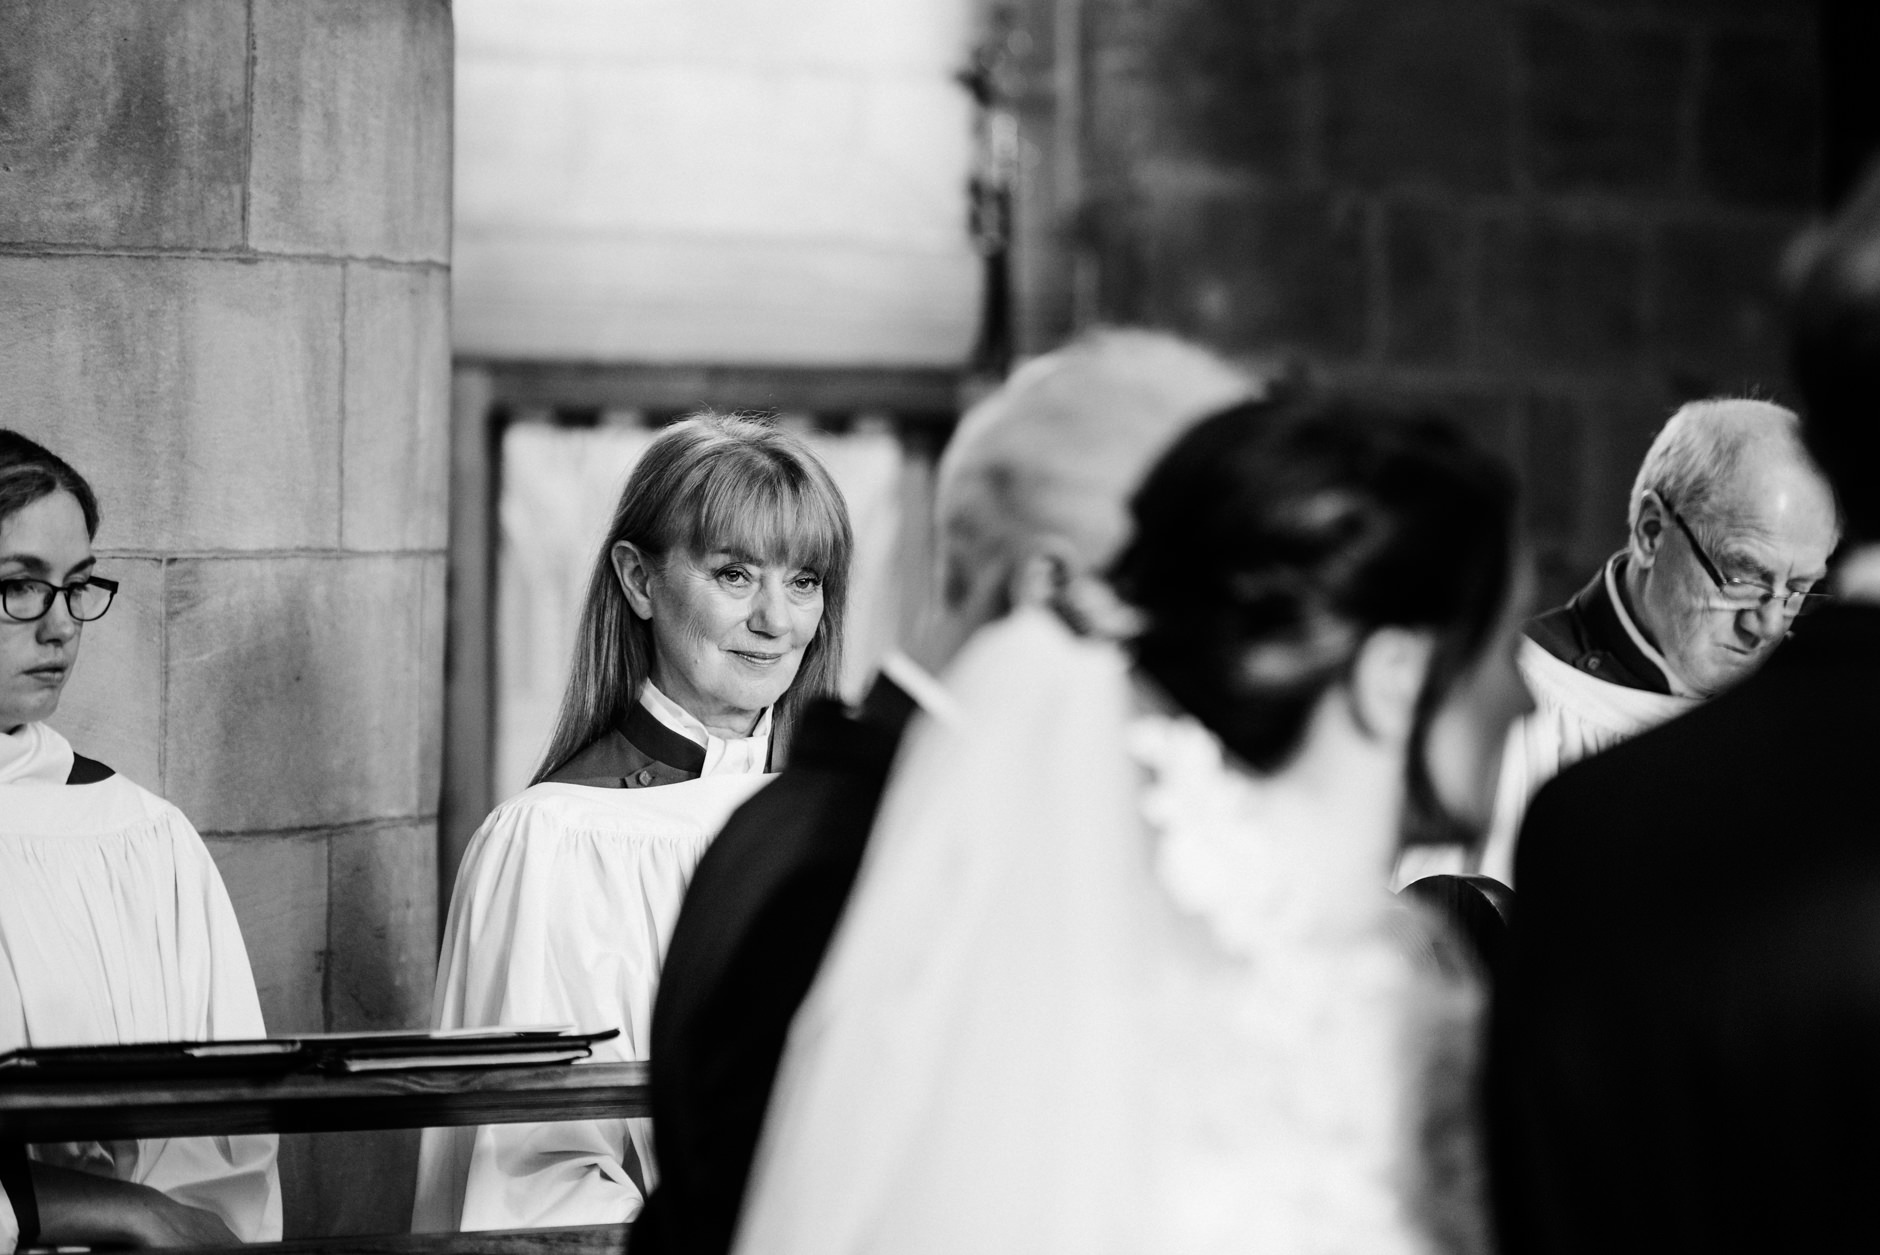 Member of the choir looking at the bride